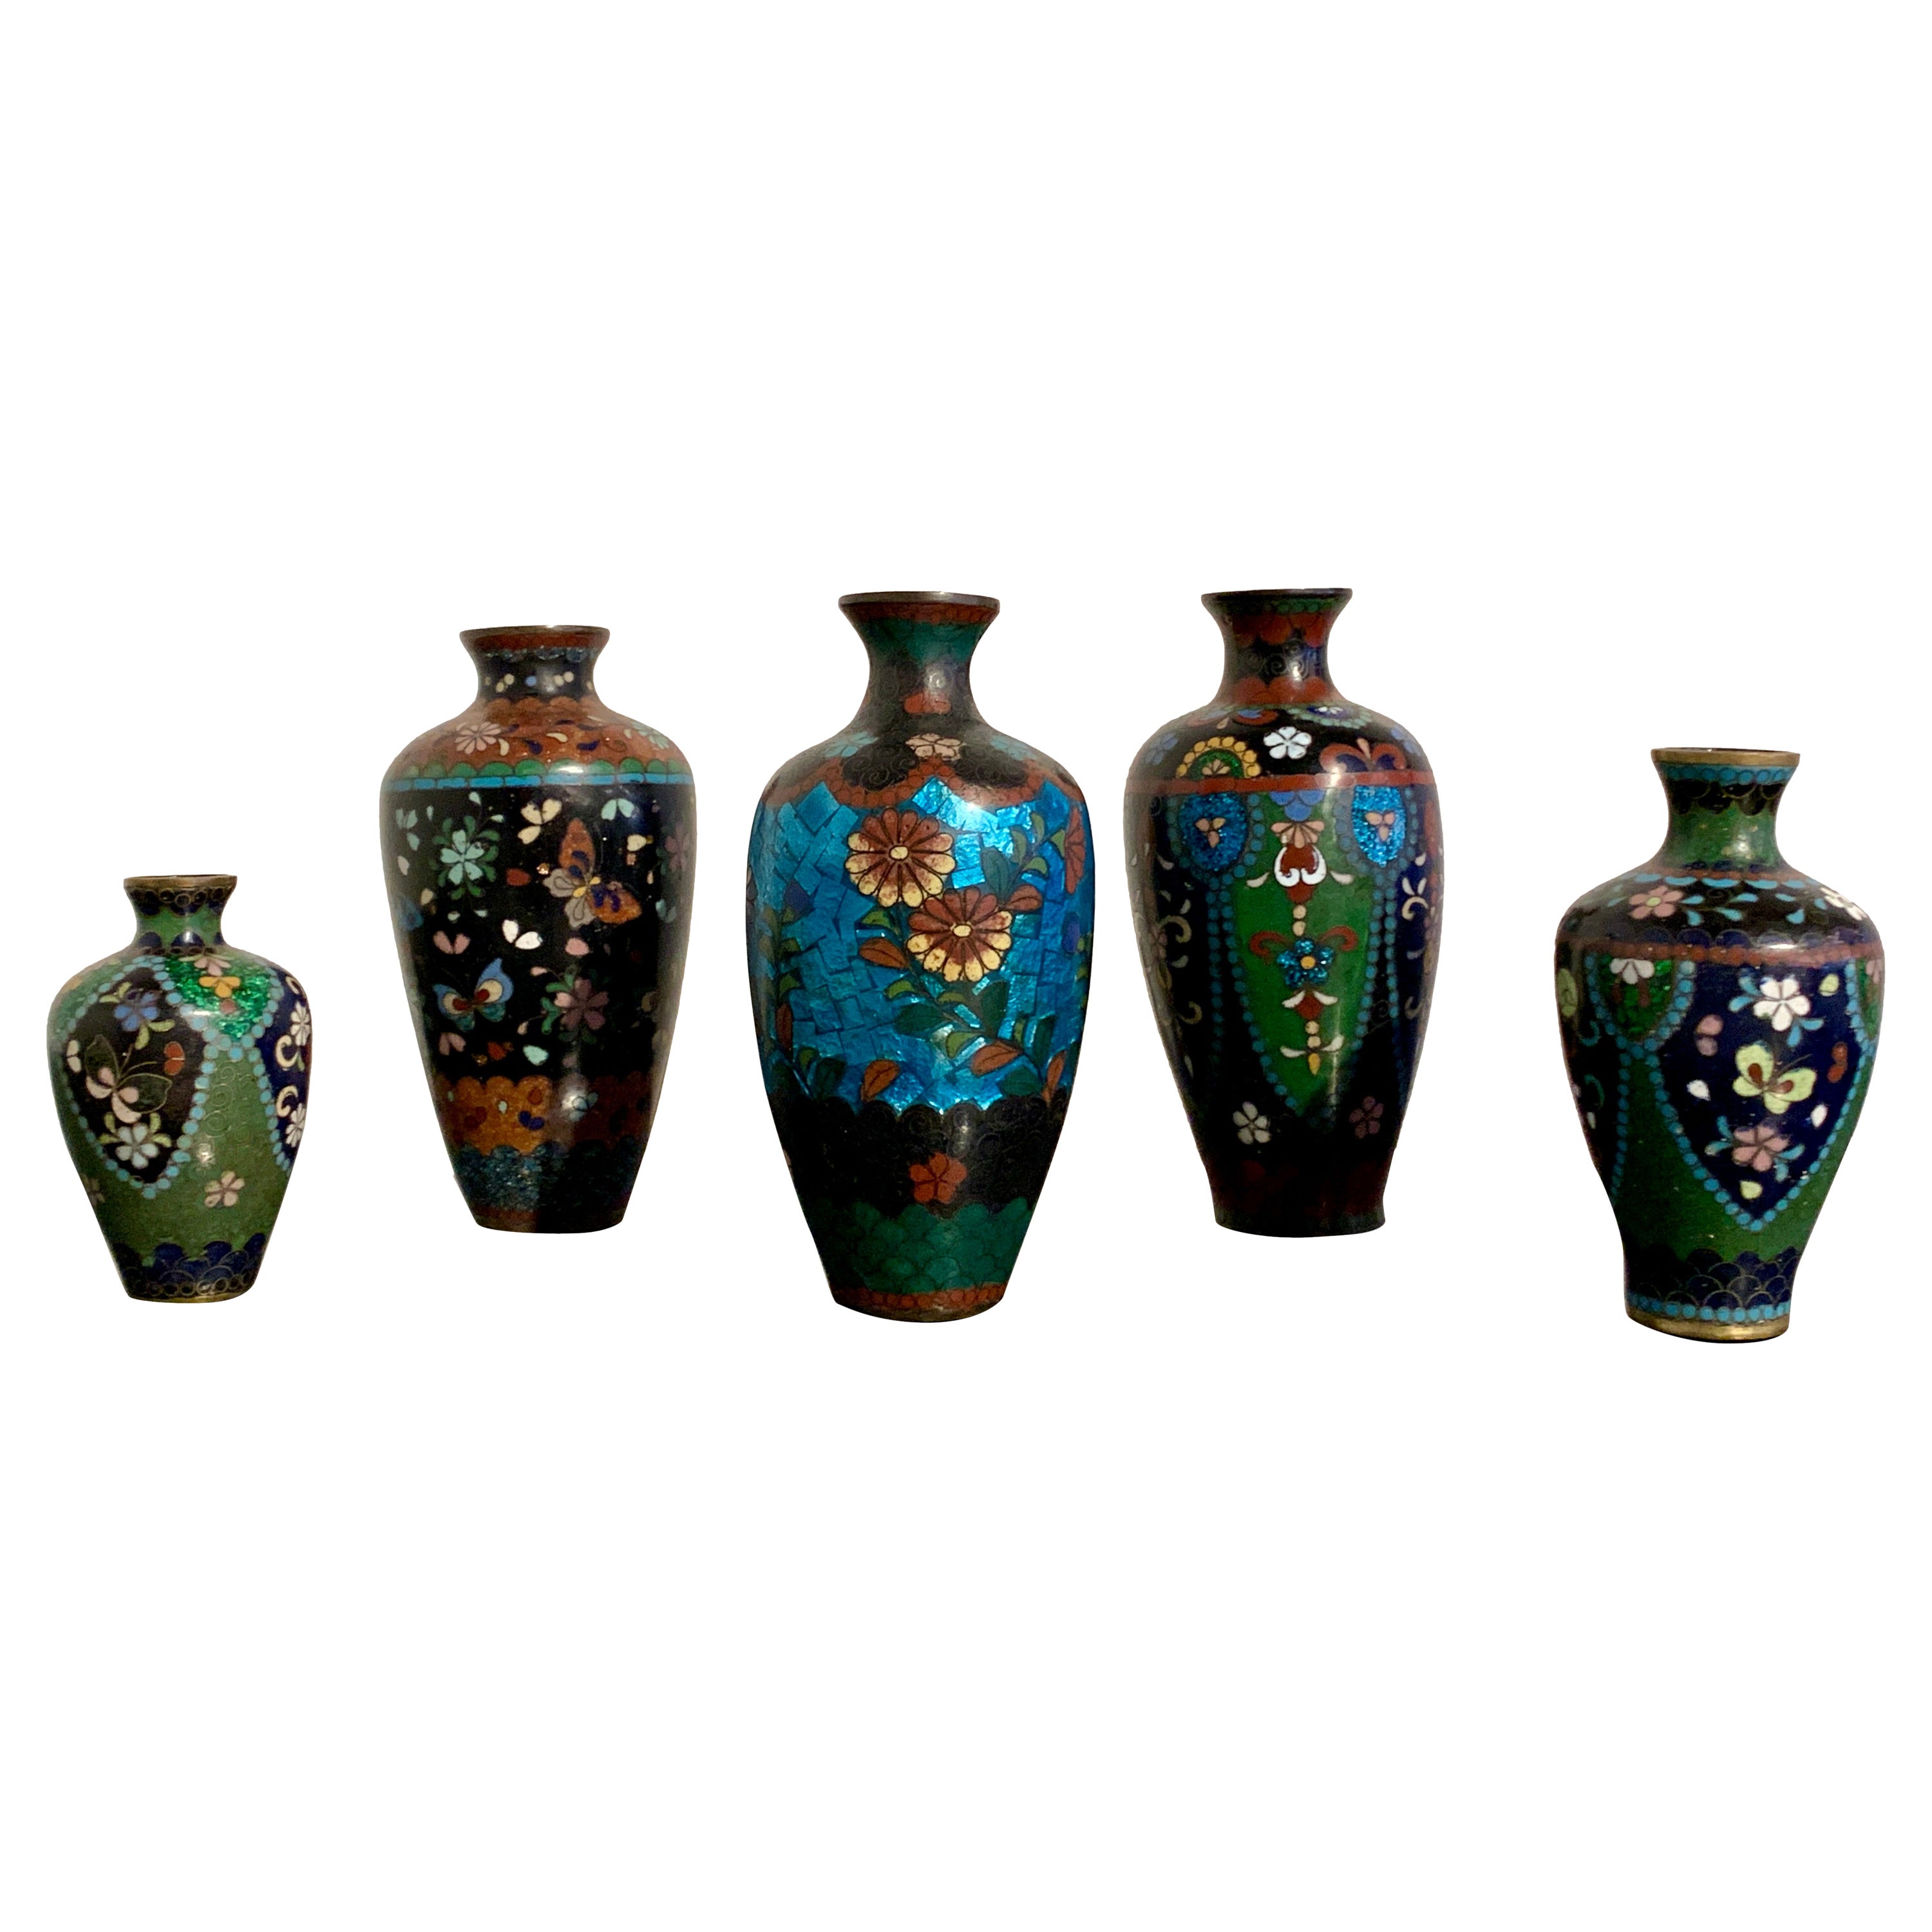 Group of 5 Small Japanese Cloisonne and Ginbari Vases, Early 20th Century, Japan For Sale